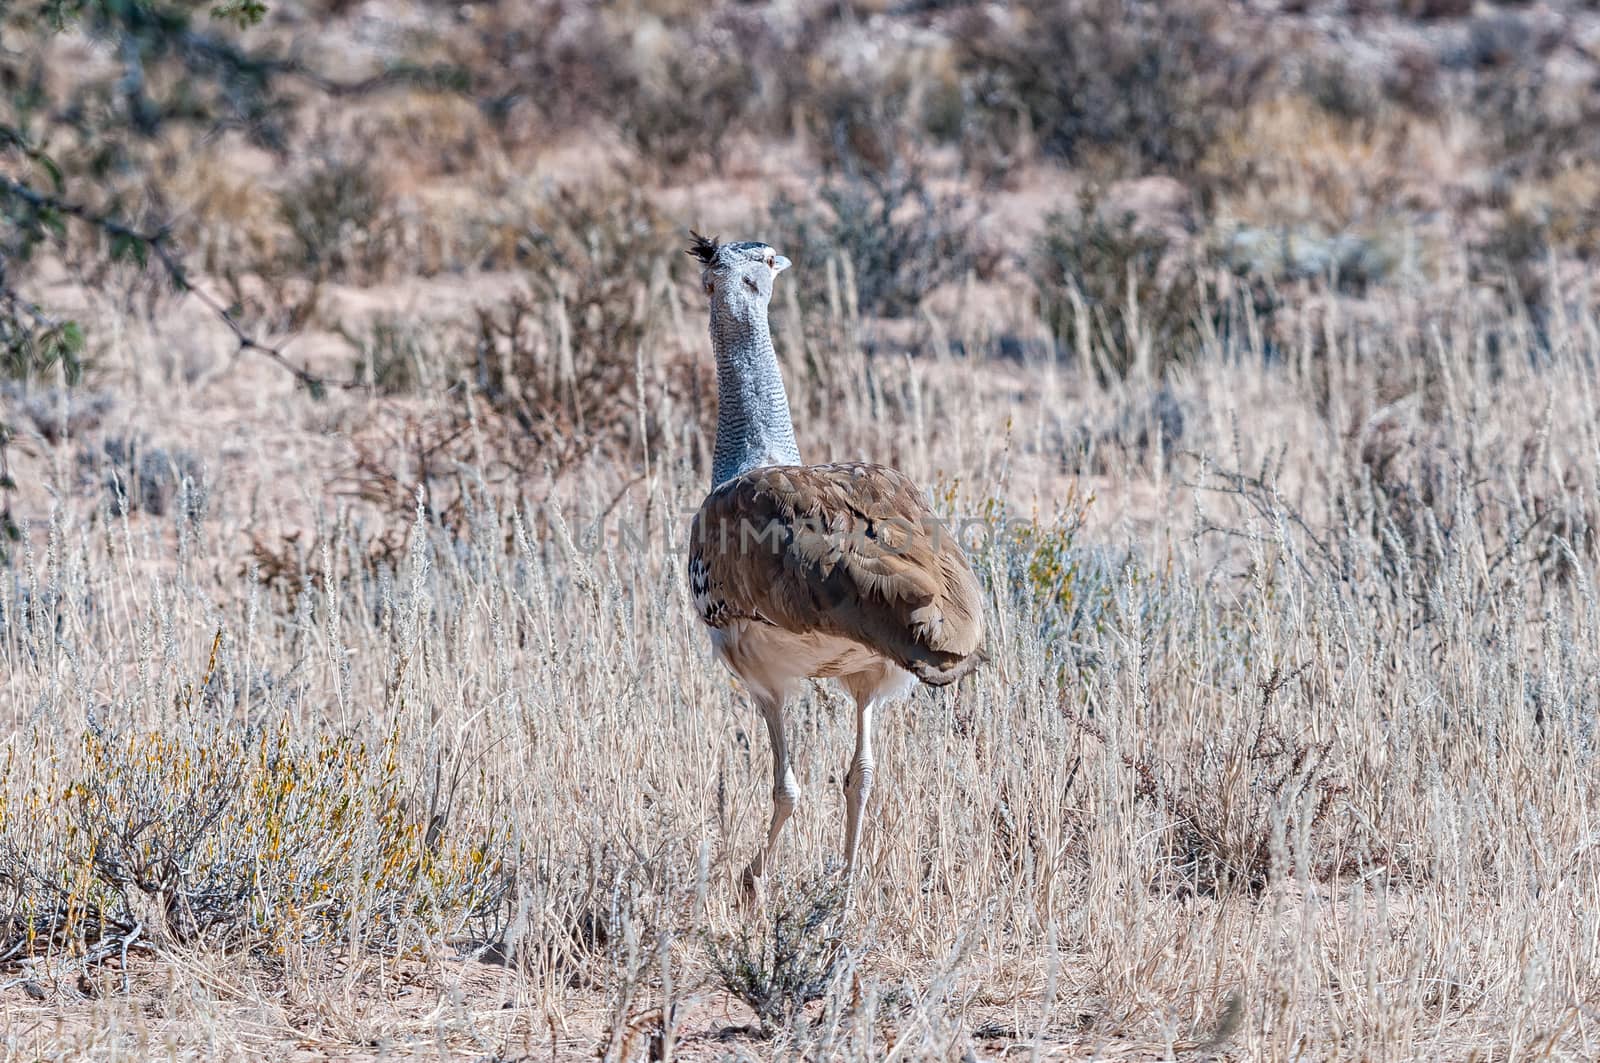 A Kori Bustard, Ardeotis kori, walking in grass with back to camera. It is the heaviest bird capable of flying